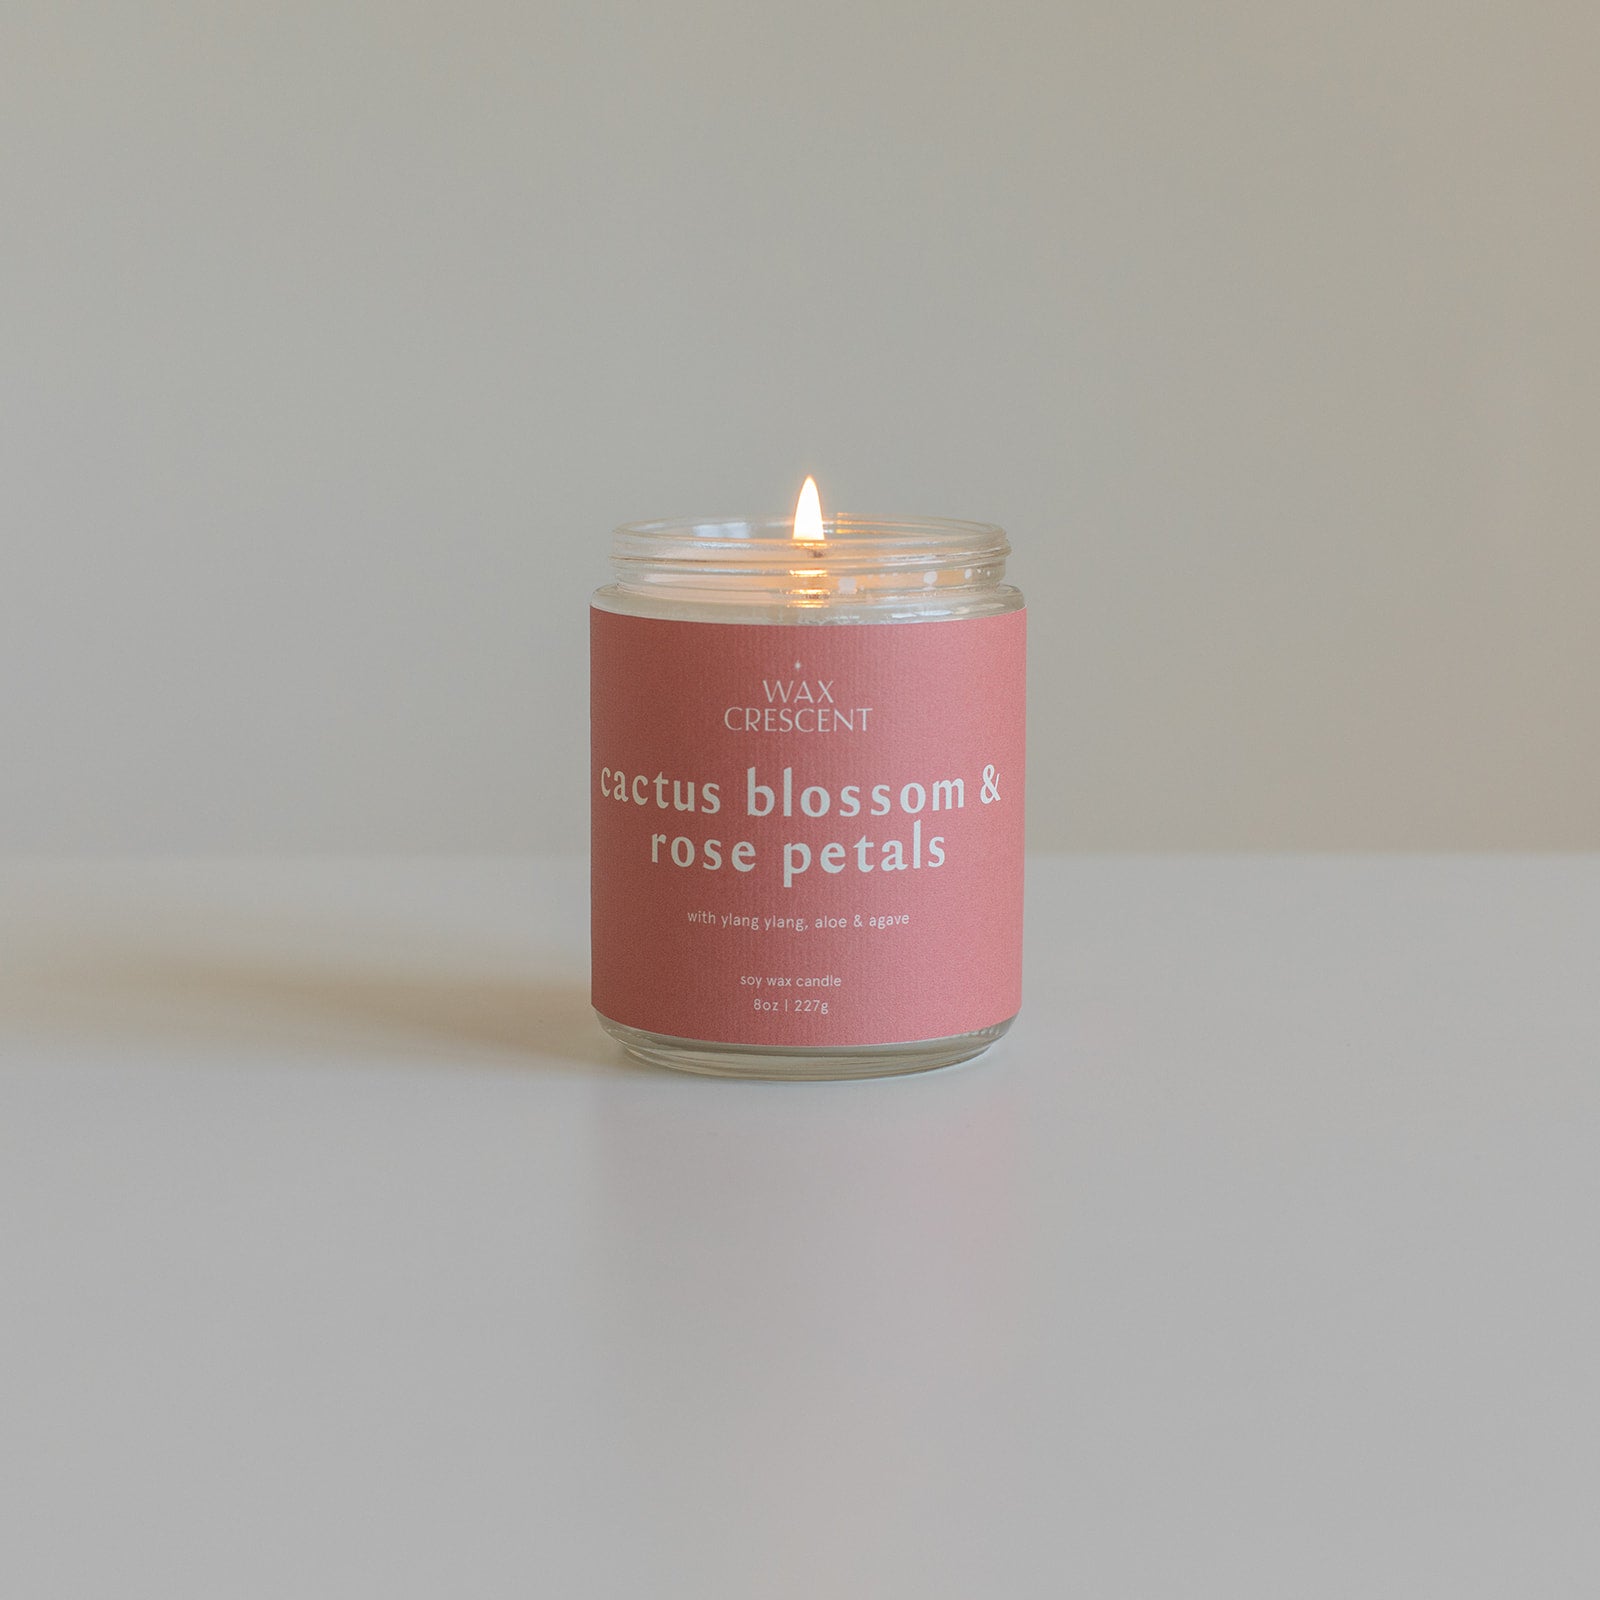 luxury soy wax spring candle made with fragrance and essential oils